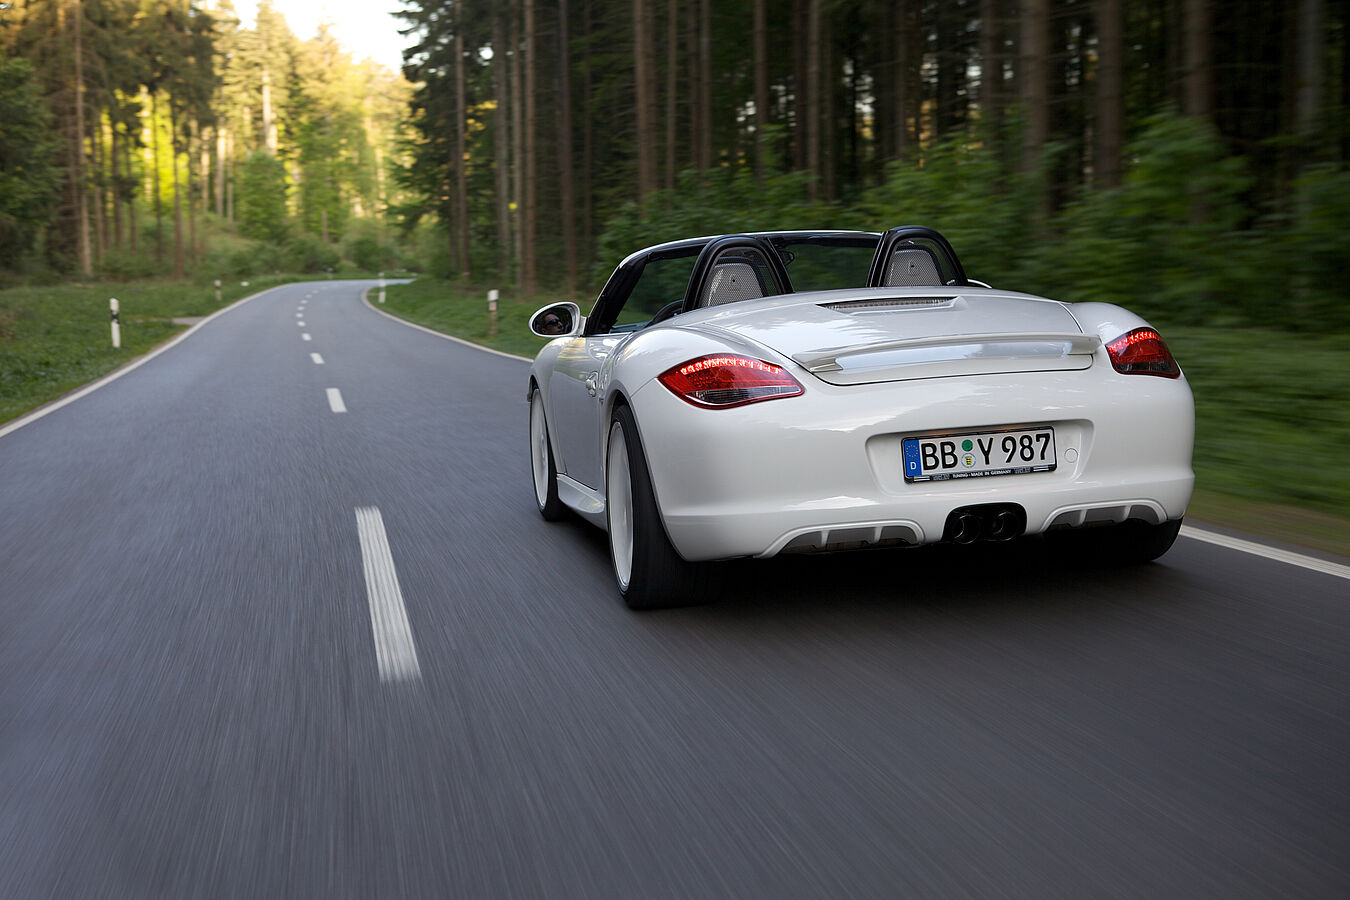 Check our price and buy Techart body kit for Porsche Boxster 987!